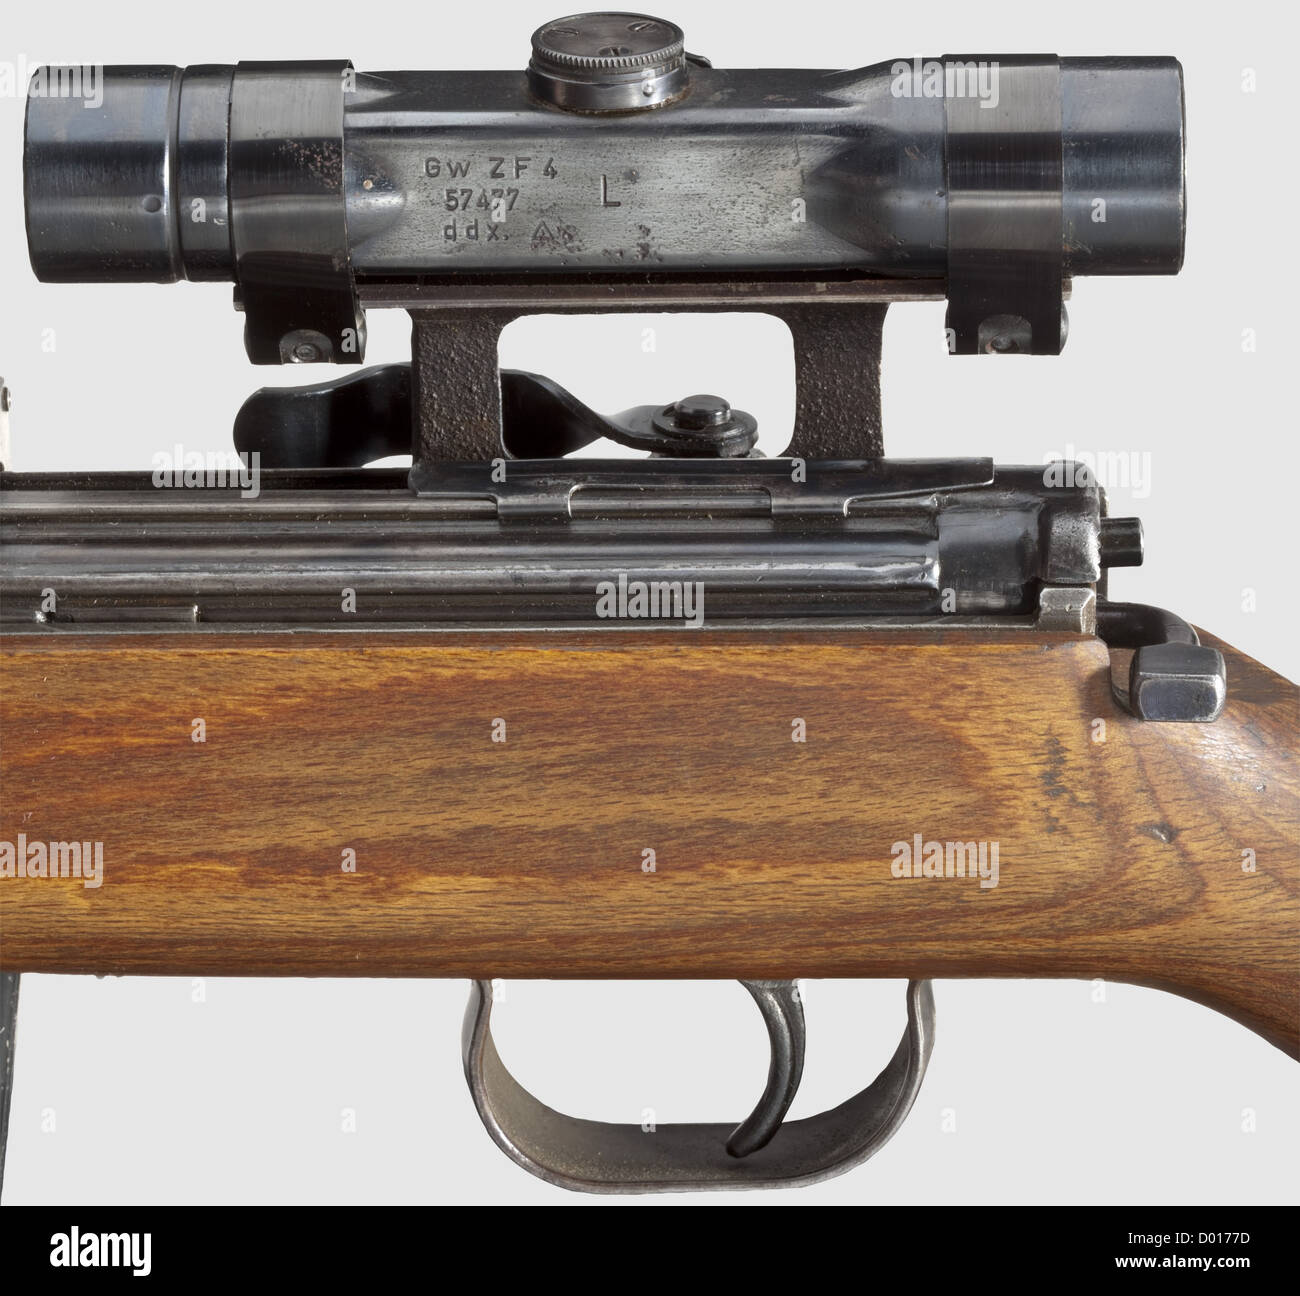 A self-loading rifle G 43,code 'ac 44' with scope ZF 4,cal.8 x 57,no.2159n.Matching numbers.Bright bore.Produced in 1944 at Walther's in Zella-Mehlis.Various acceptance marks eagle/'359'.Ten shots.Dust cover.Large,correct hooded sight.Original finish in a light patina,few wear marks.Matching-numbered laminated stock with cleaning rod.Magazine coded 'gcb'.Mounted: original,re-finished scope ZF 4,marked 'Gw ZF 4 / 57477 / ddx',beside it 'L' for Luftwaffe.Reticule 1.Without protection cap for windage.Technically and optically in good order.,Additional-Rights-Clearences-Not Available Stock Photo